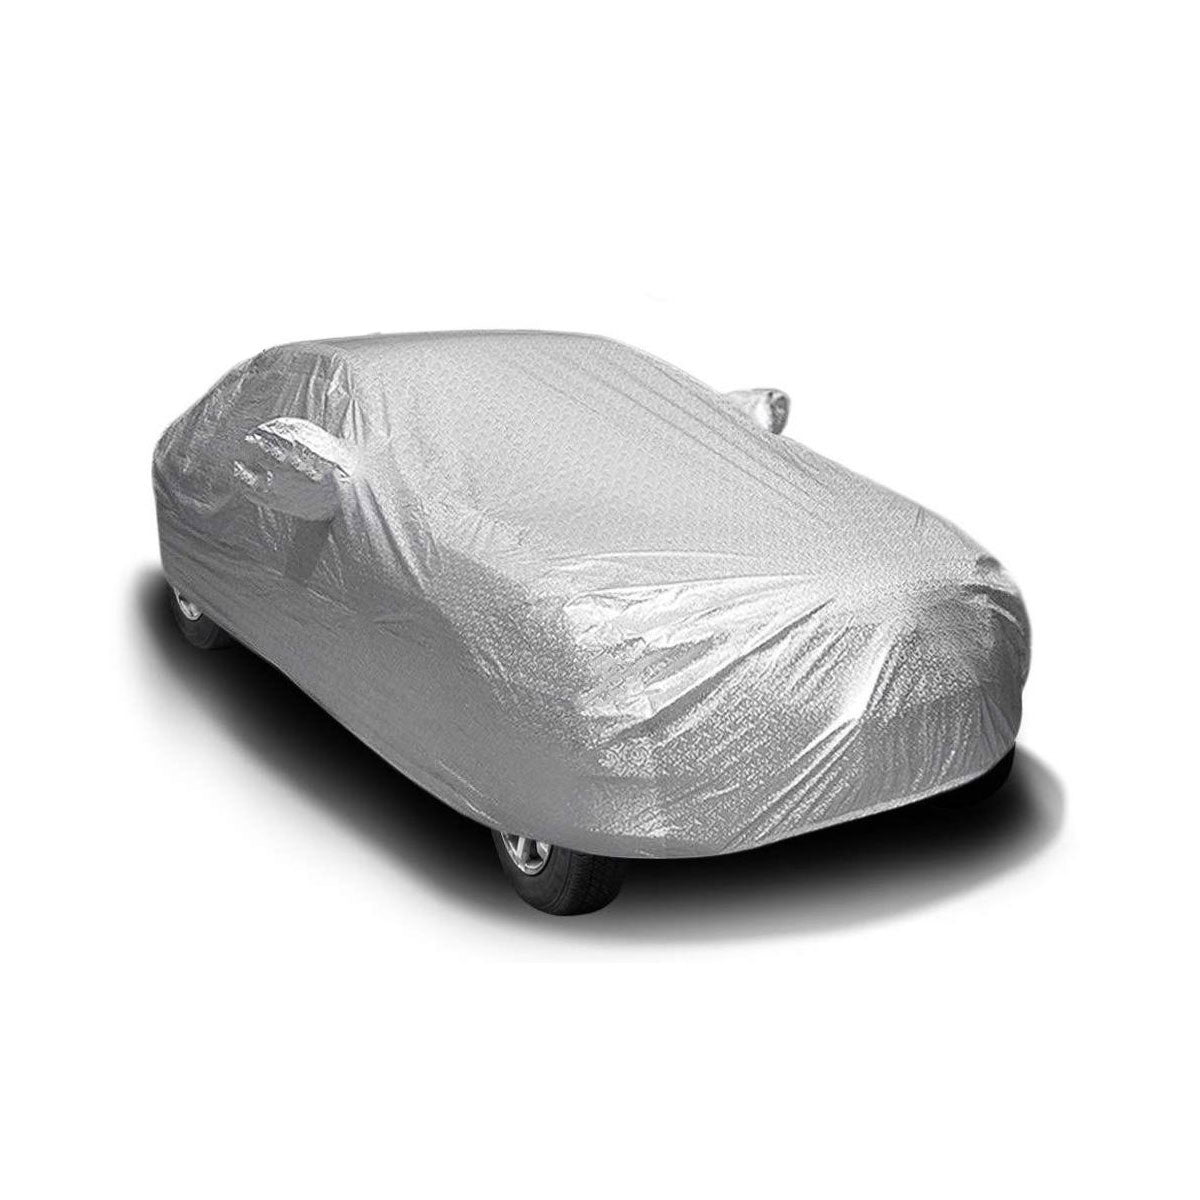 Oshotto Spyro Silver Anti Reflective, dustproof and Water Proof Car Body Cover with Mirror Pockets For Tata Indica